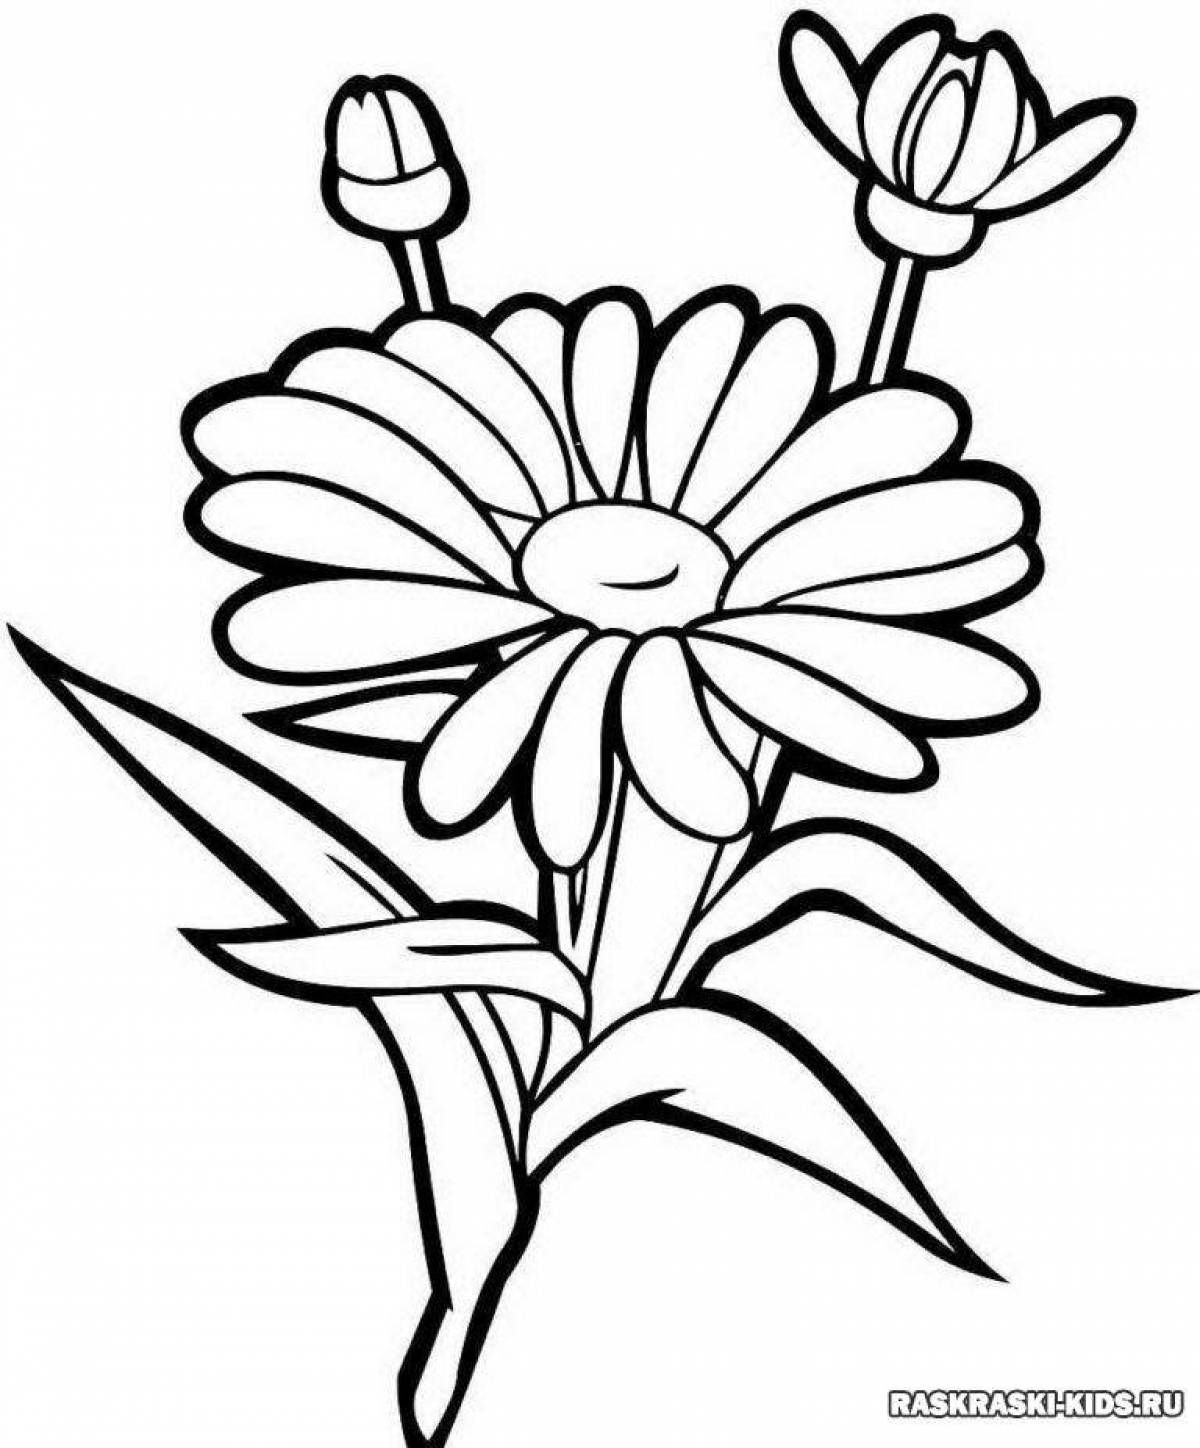 Camomile flower coloring page